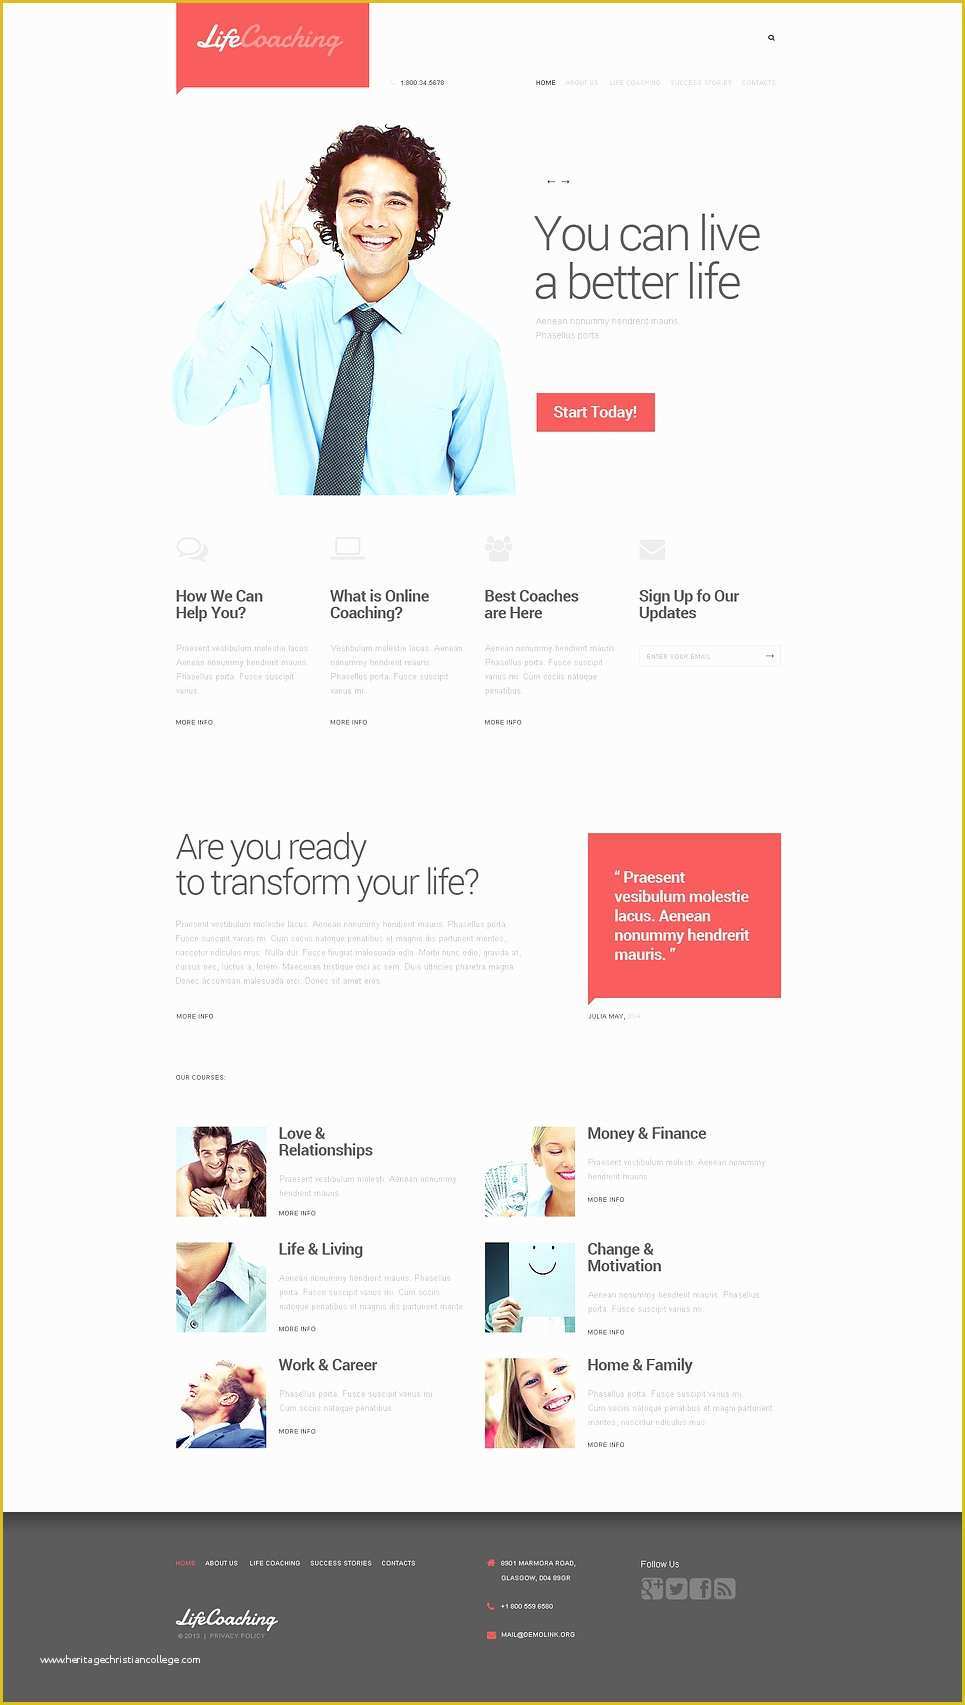 Coaching Website Templates Free Download Of Life Coach Responsive Website Template